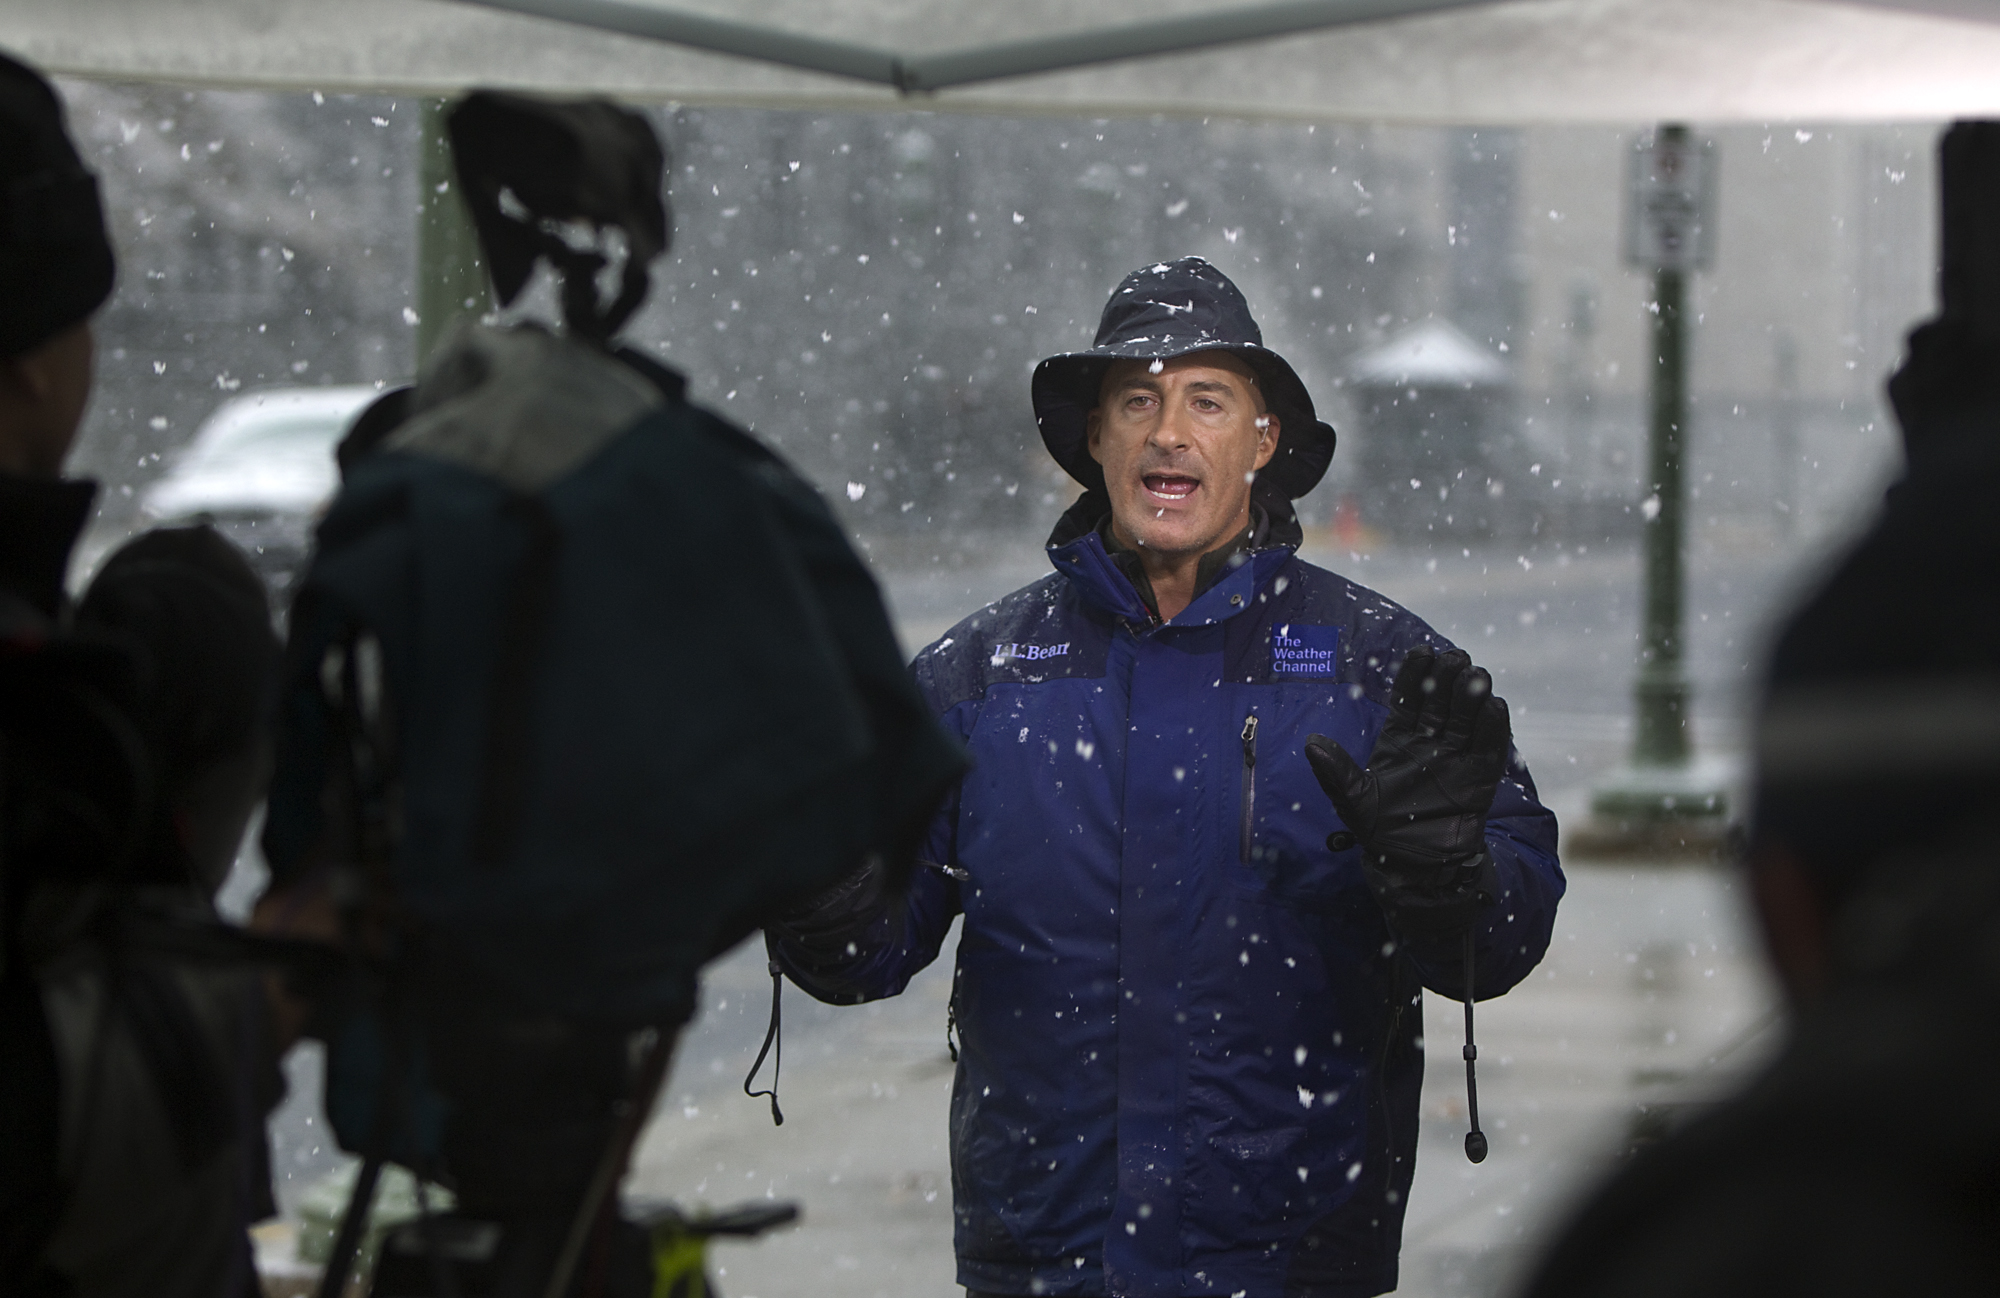 The Weather Channel host, Jim Cantore, goes live from Commonwealth Ave behind the Pennsylvania State Capitol Saturday, Oct. 29, 2011 in Harrisburg, PA